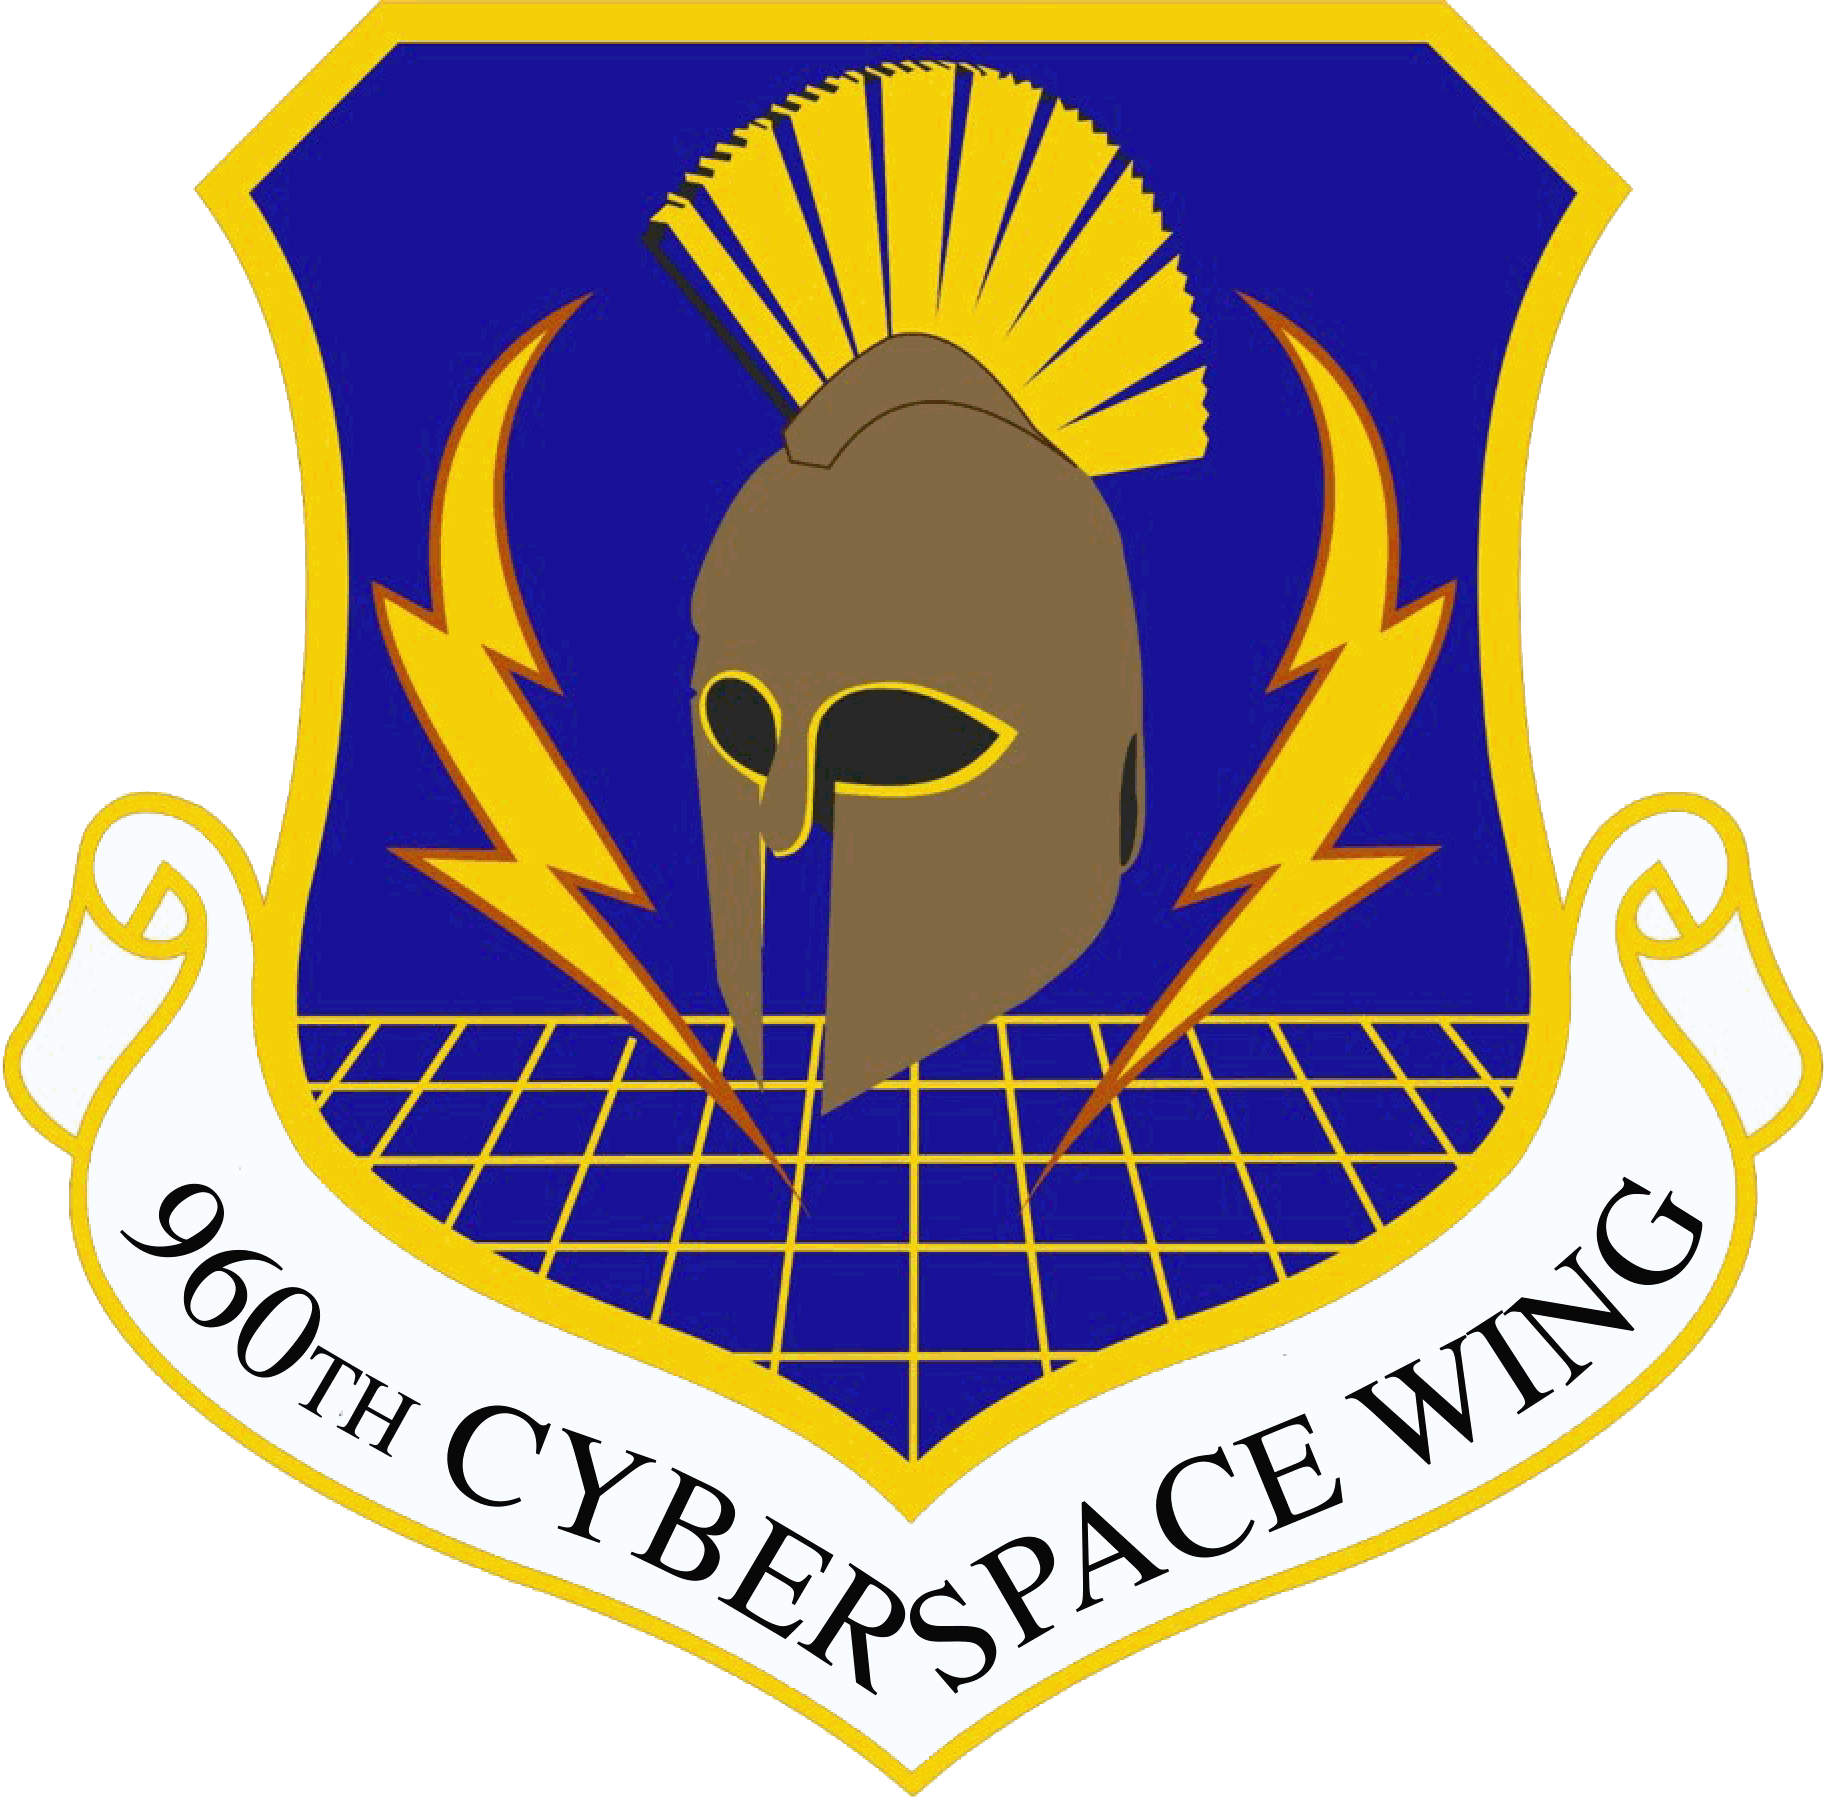 960th Cyberspace Wing emblem